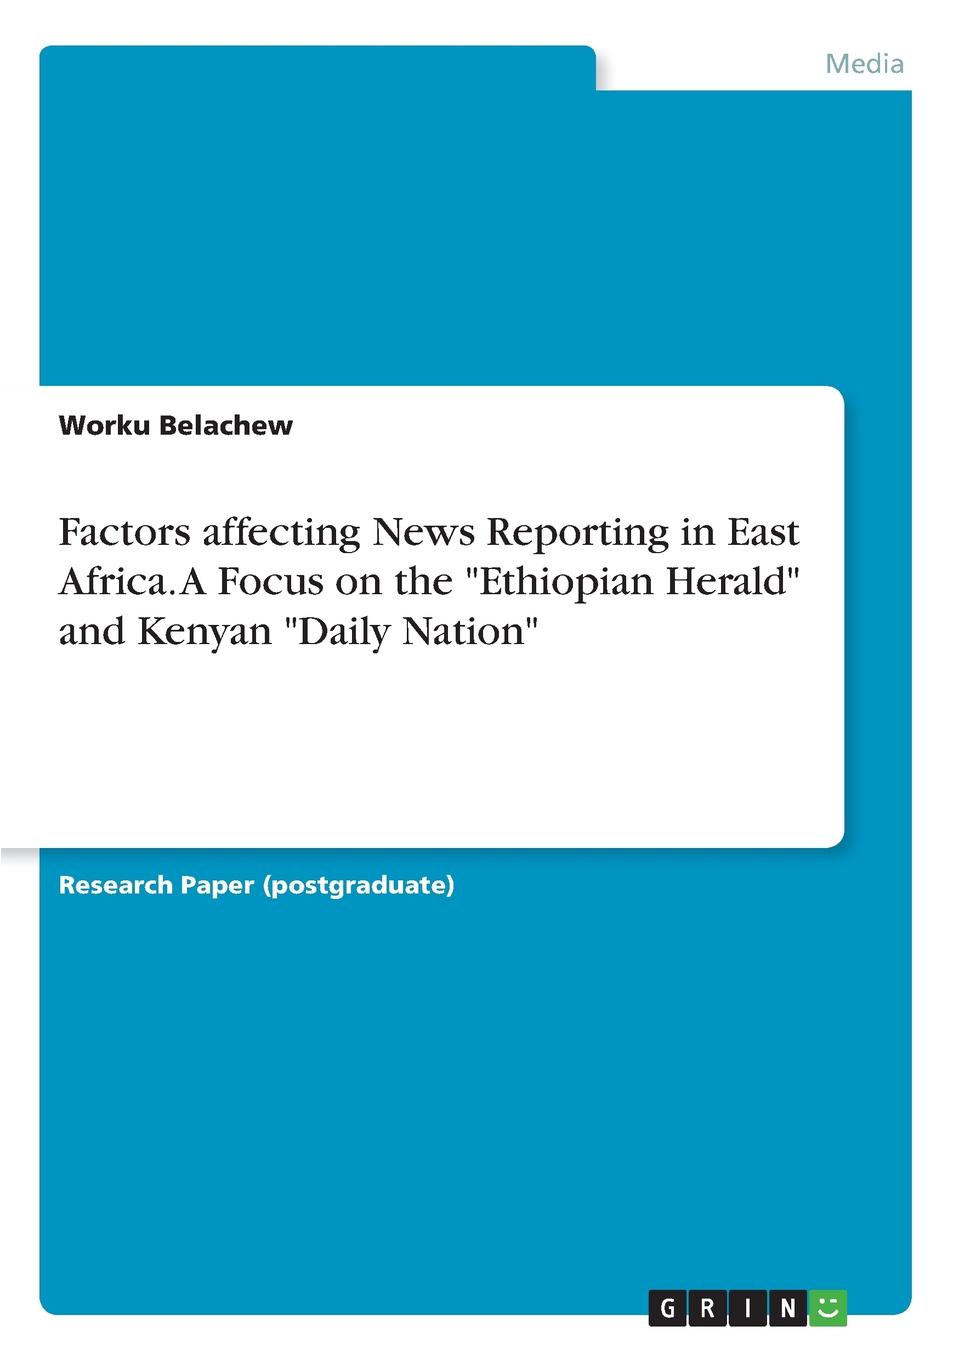 фото Factors affecting News Reporting in East Africa. A Focus on the "Ethiopian Herald" and Kenyan "Daily Nation"